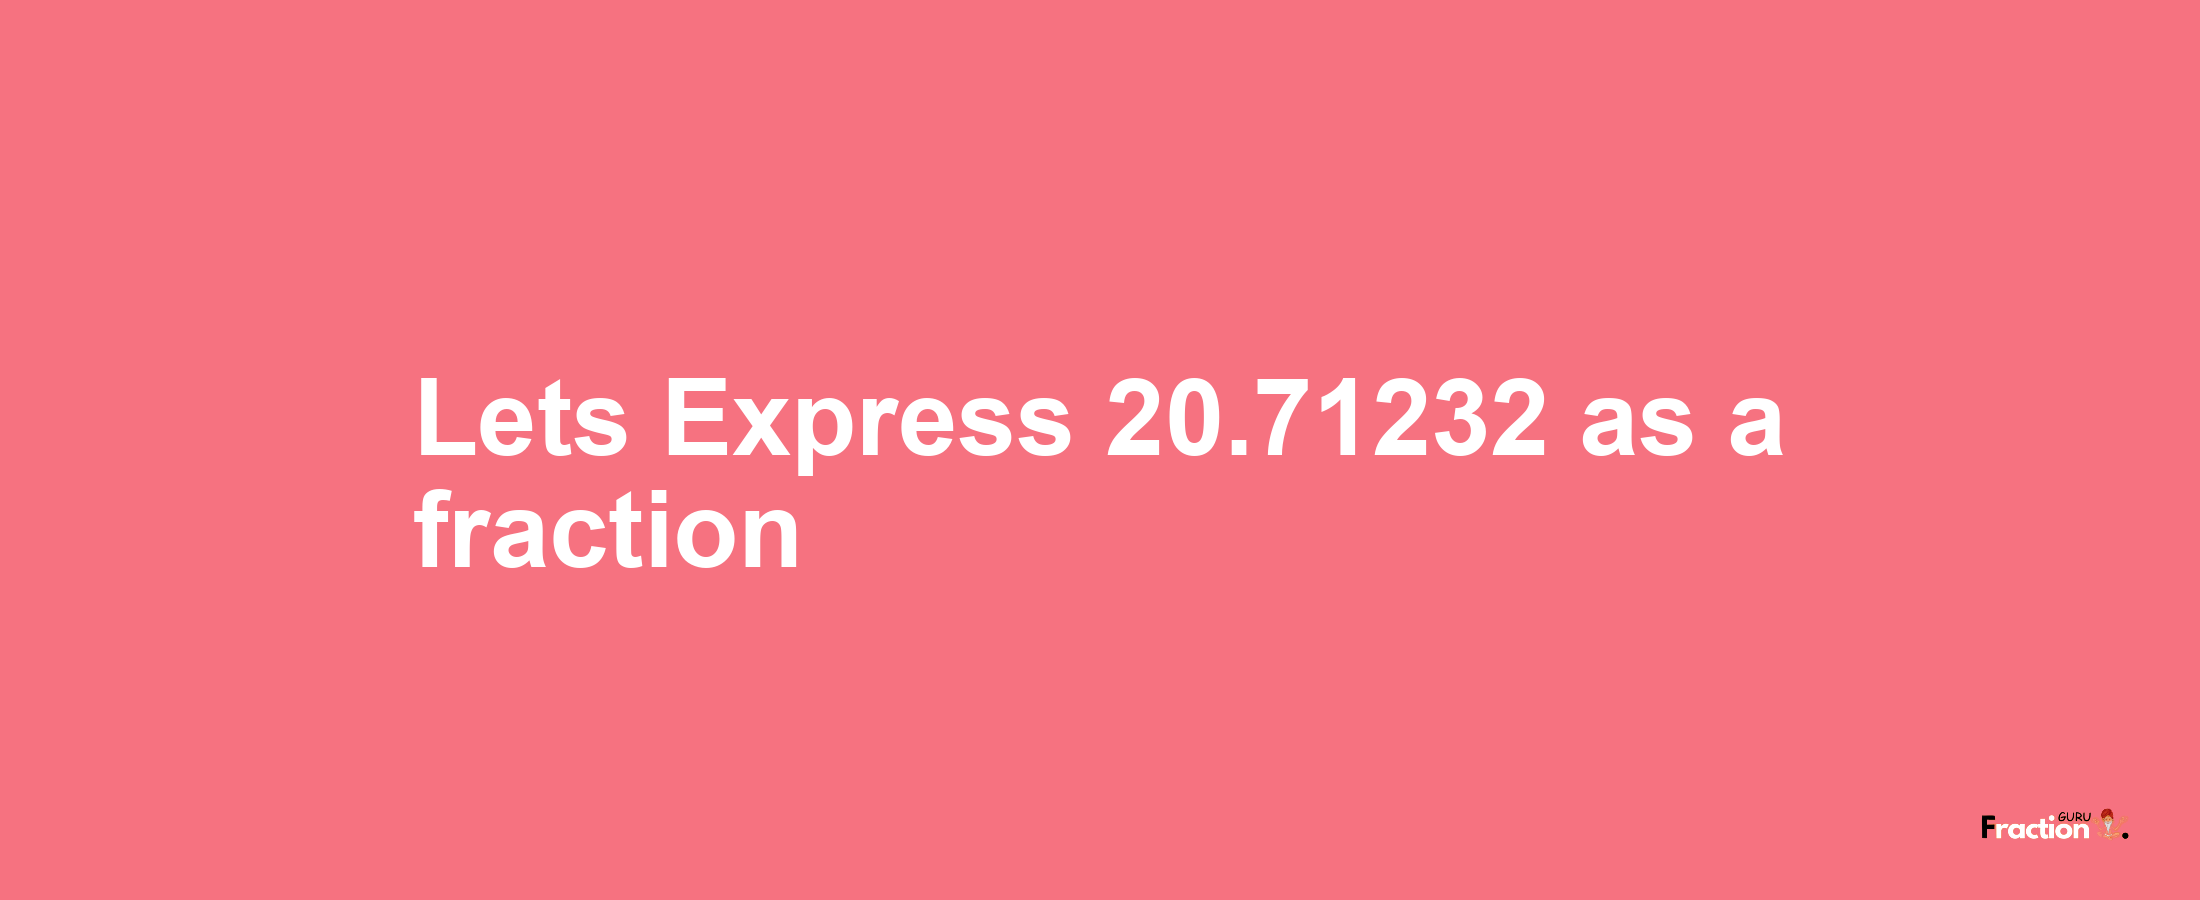 Lets Express 20.71232 as afraction